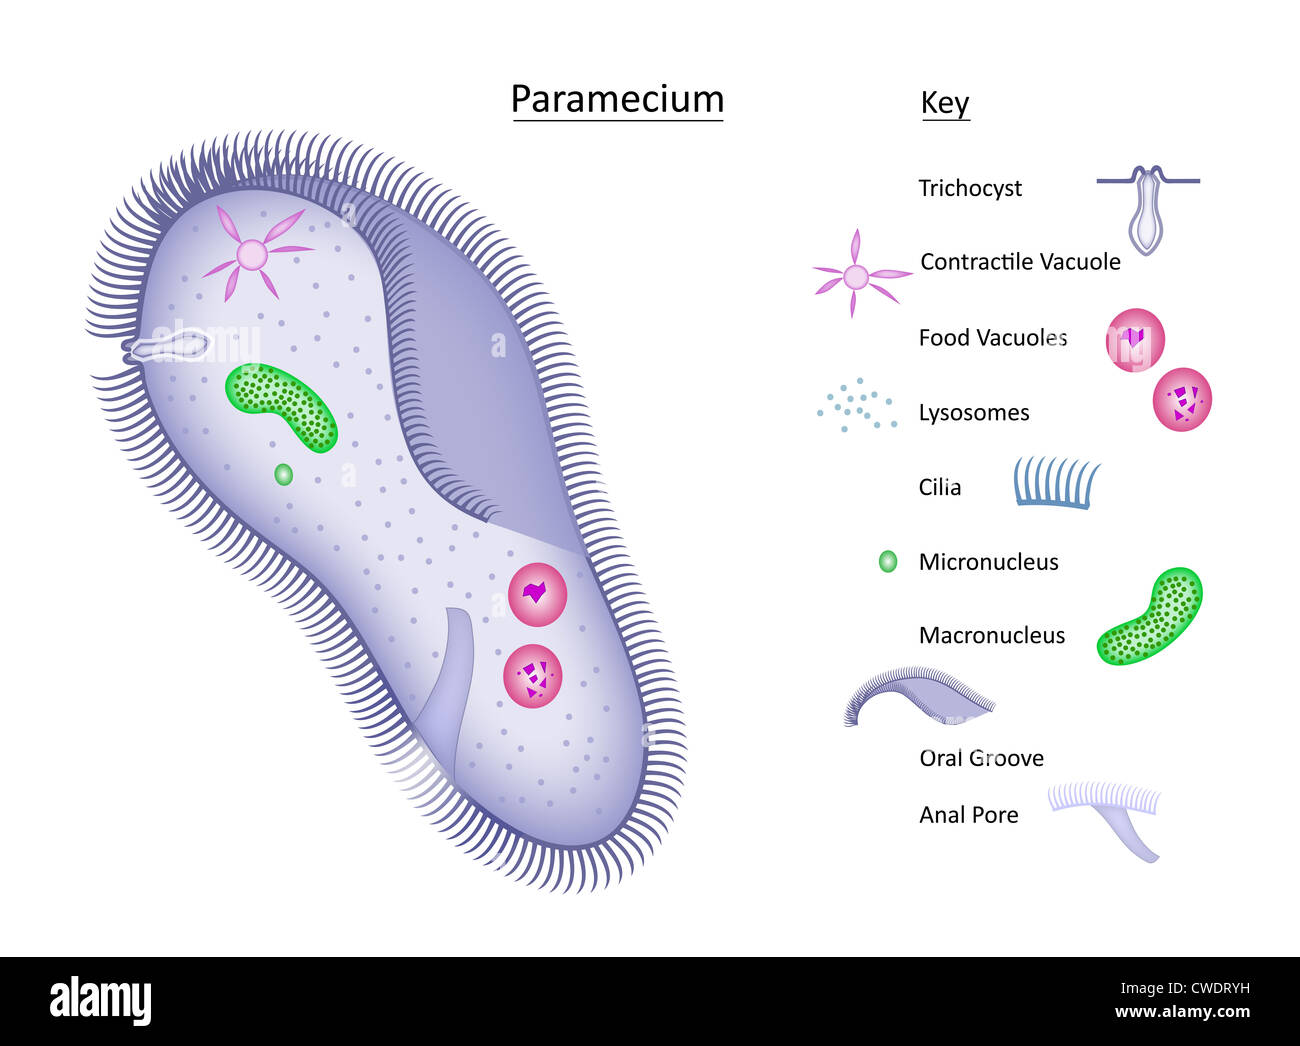 Colorful vector illustration of a single-celled paramecium with structures clearly labeled in separate key. All layers labeled. Stock Photo